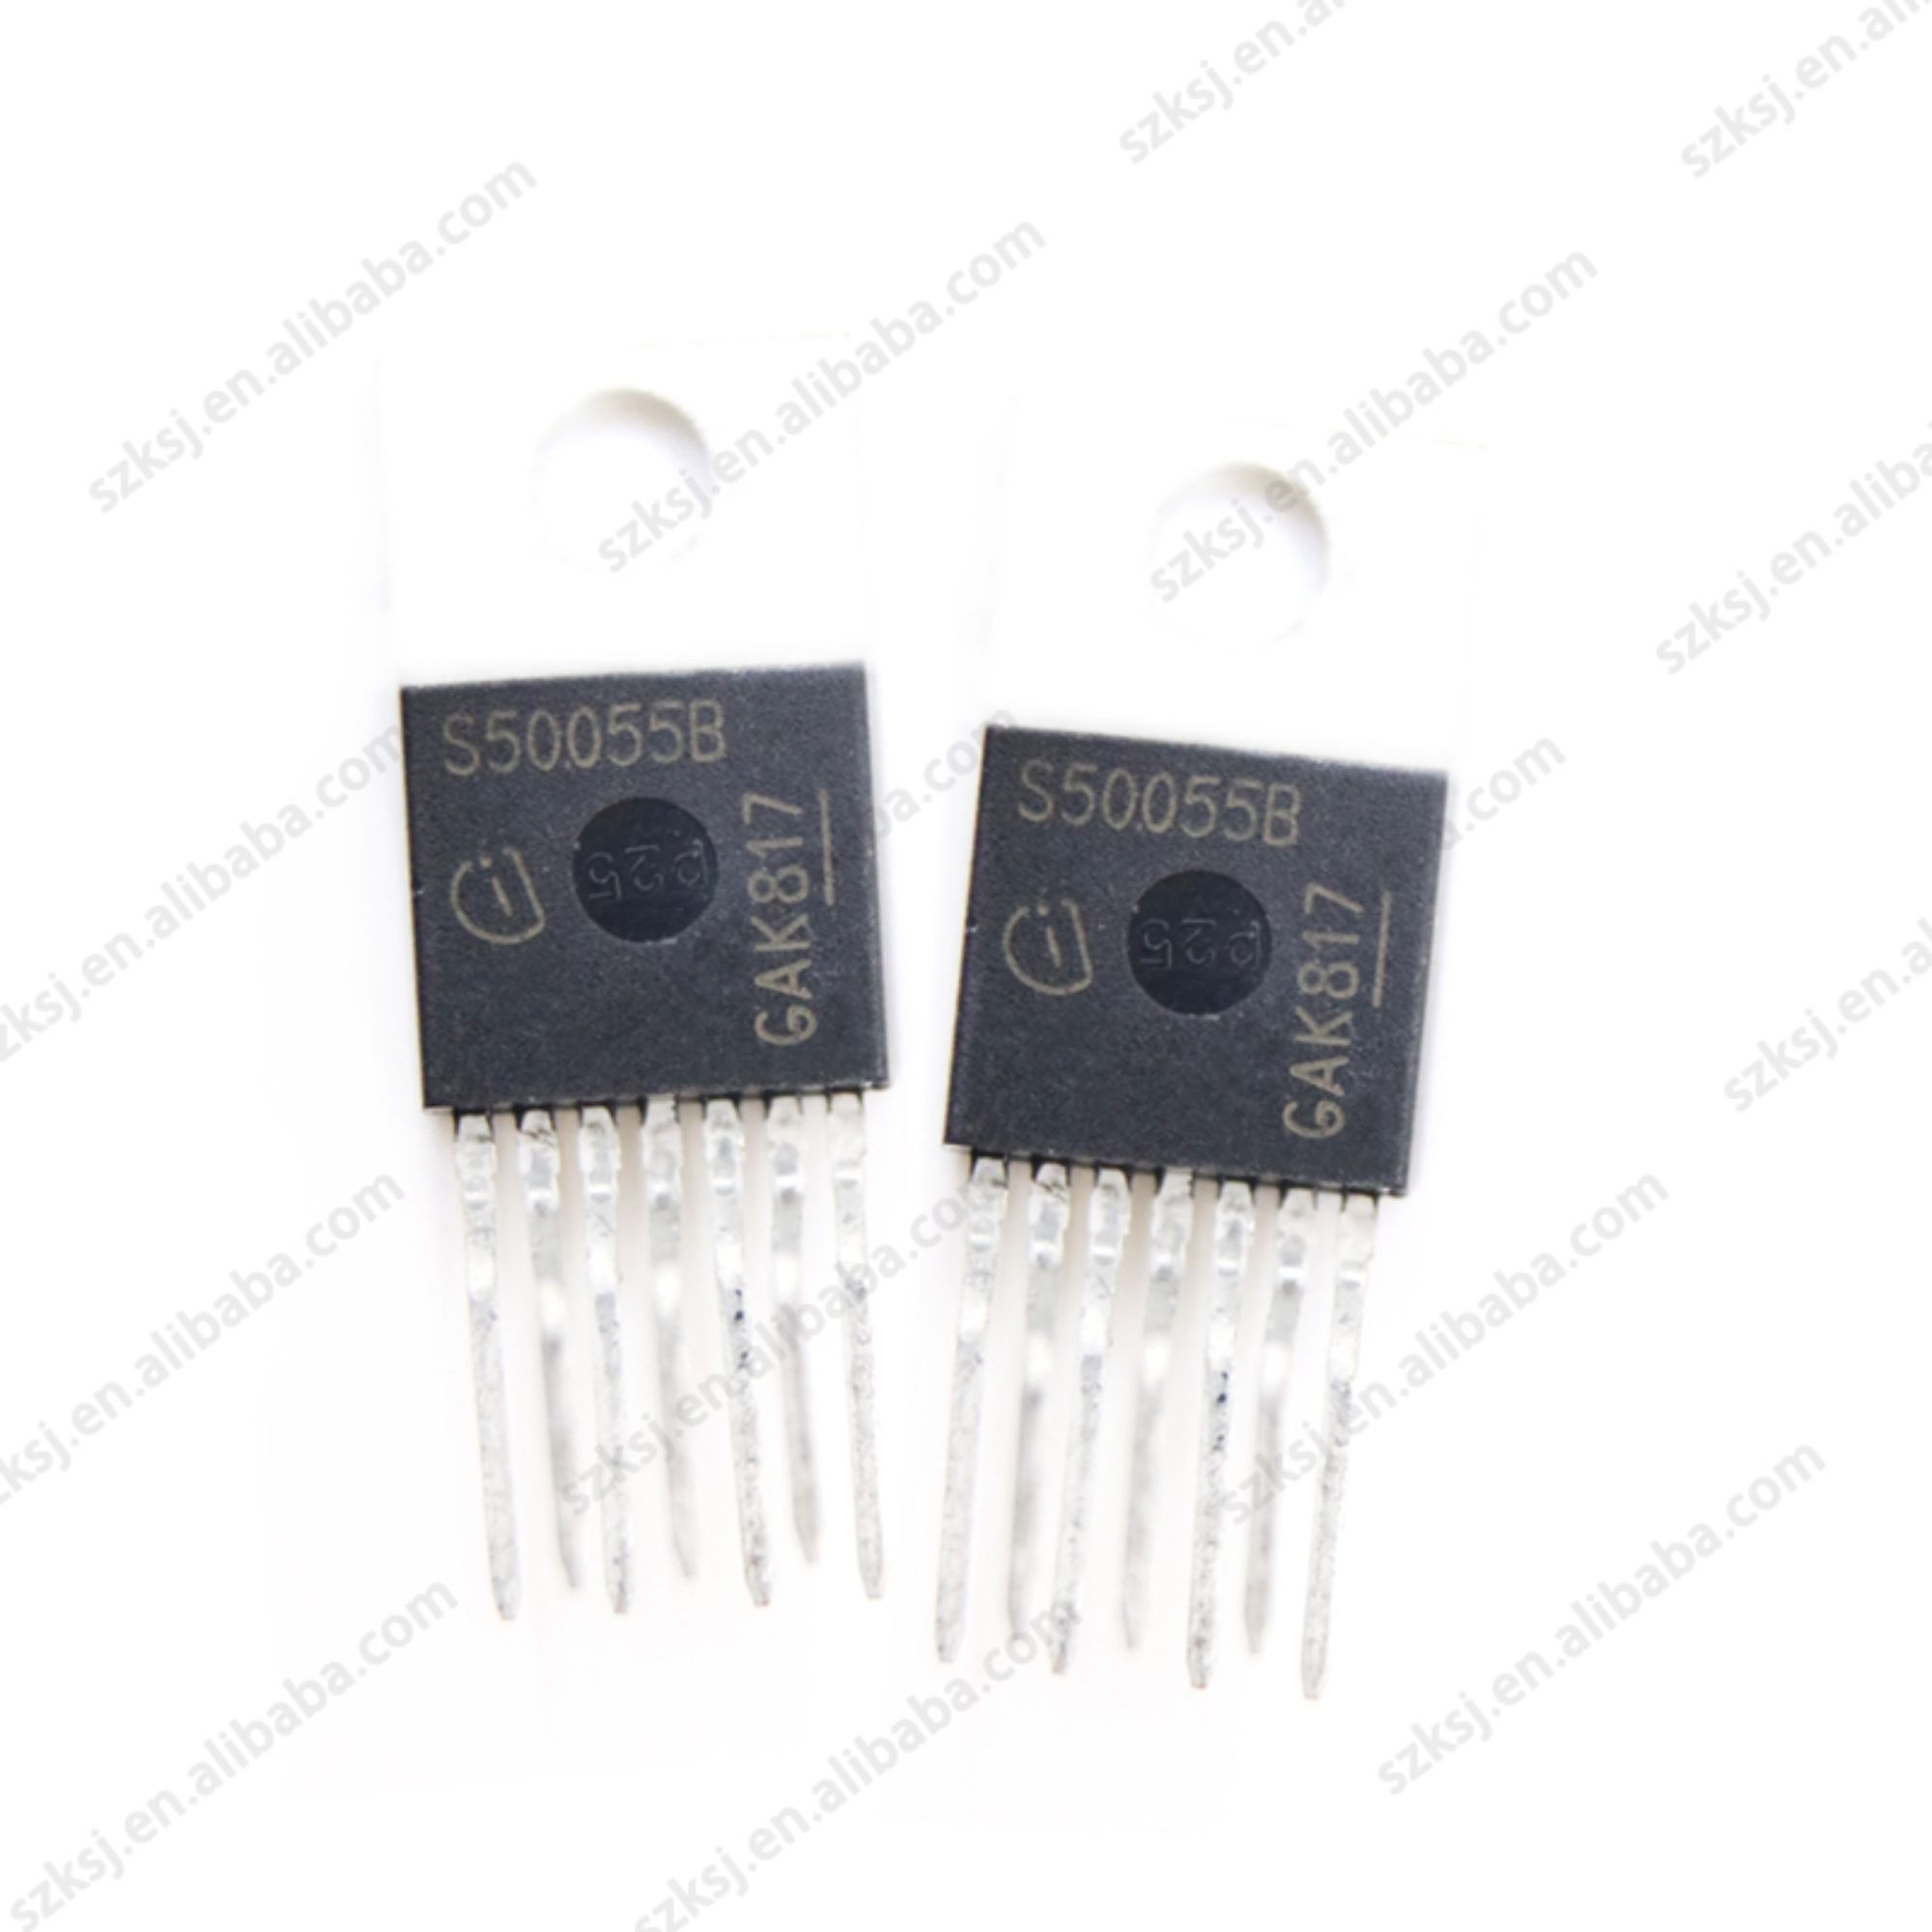 BTS500551TMBAKSA1 BTS50055B new original stock power electronic switch IC chip P-TO220-7-11 IC